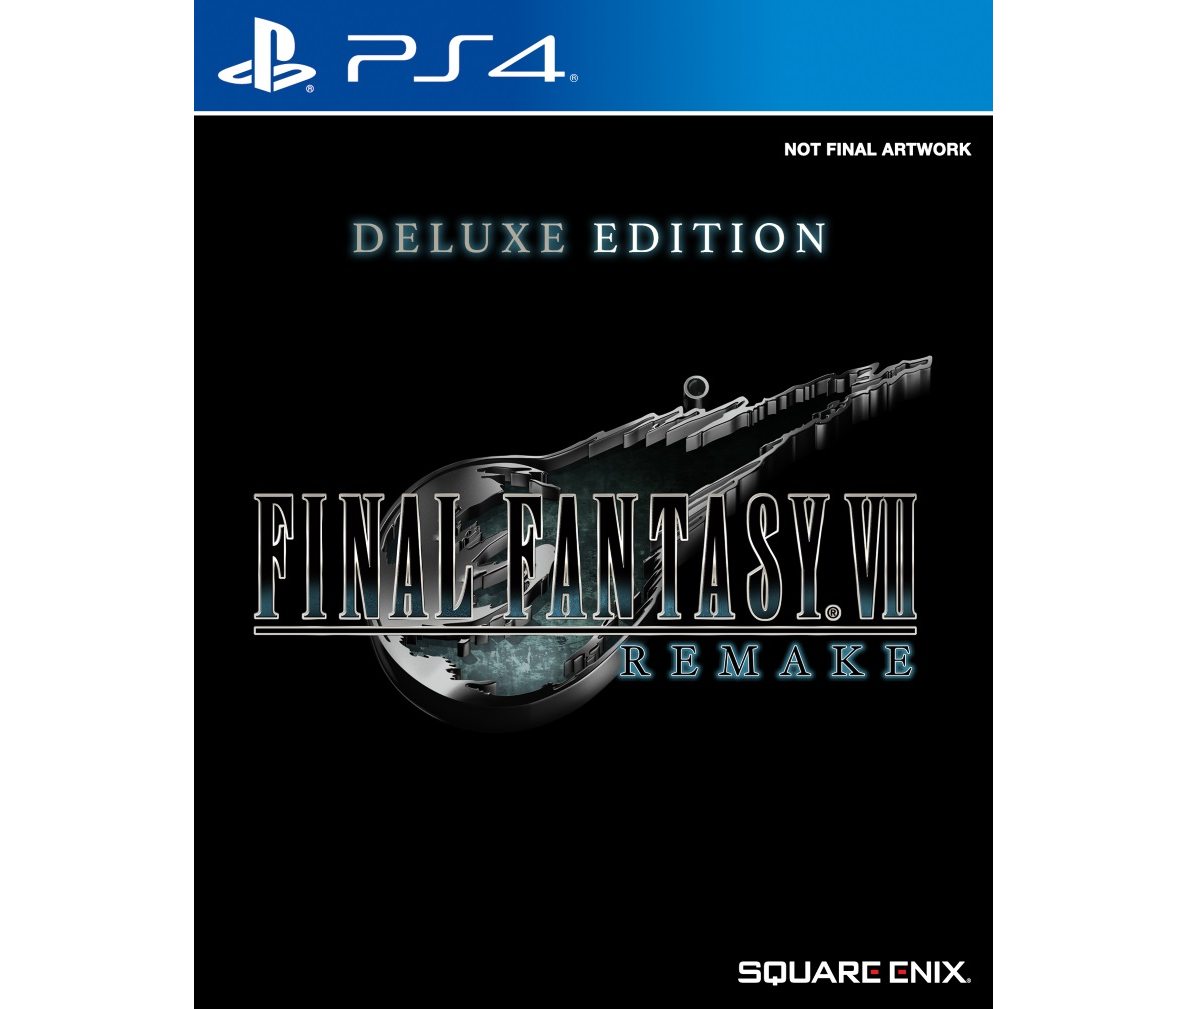 PS 4 Final Fantasy VII Remake. Deluxe Edition PS 4